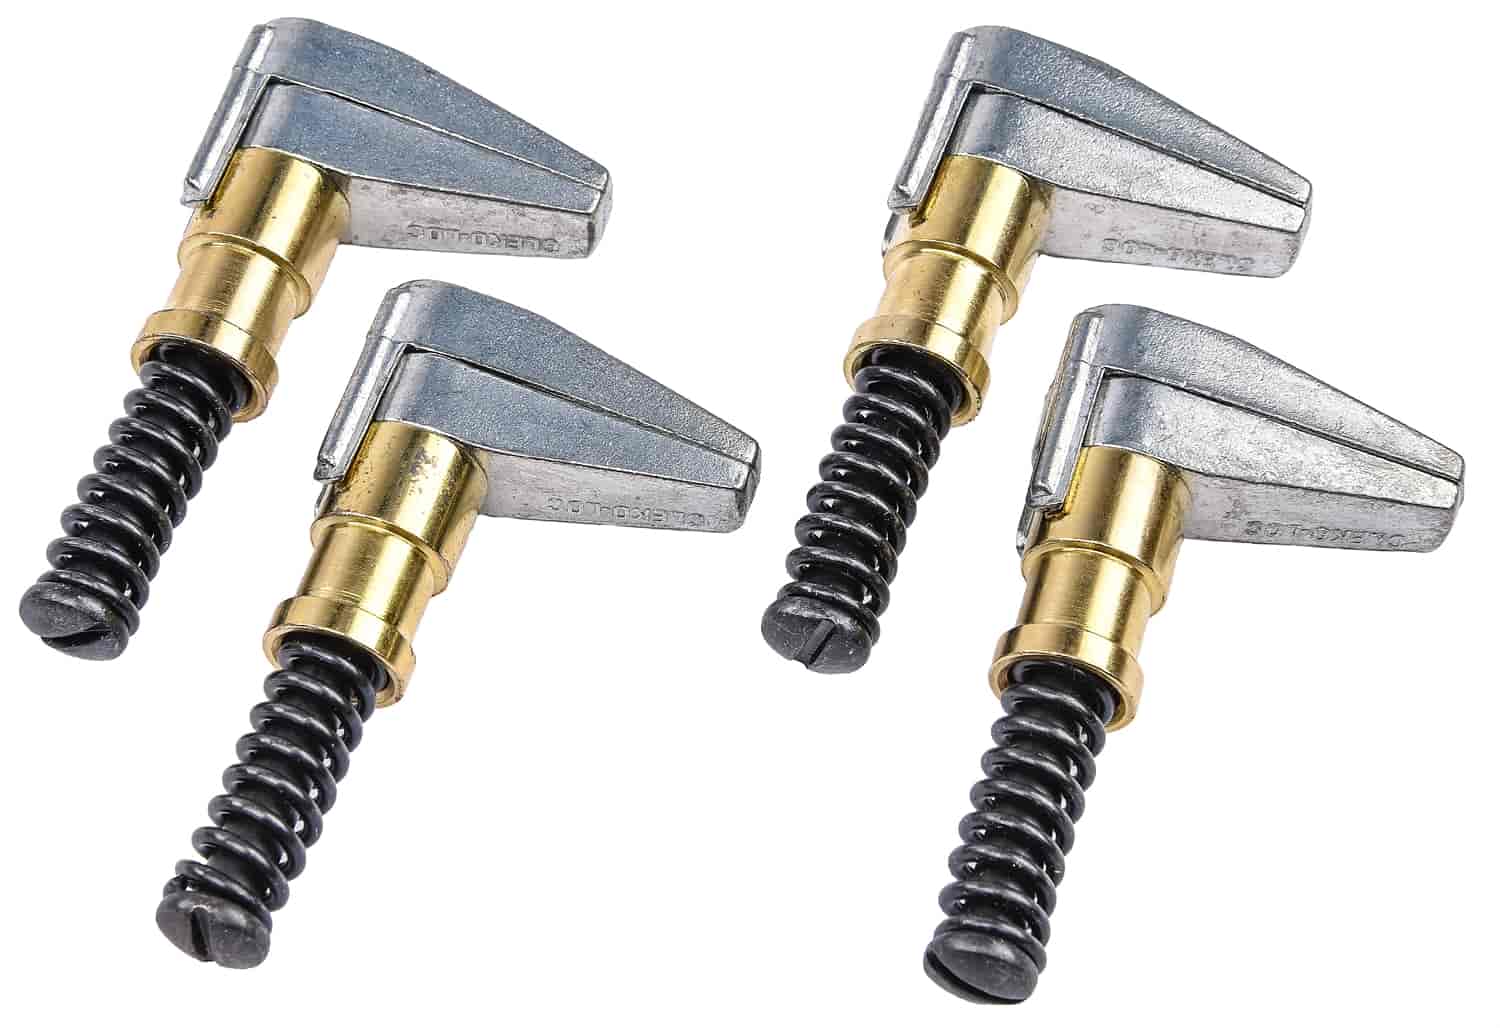 Cleco Side Grip Clamps 3/4" Gap x 1" Reach